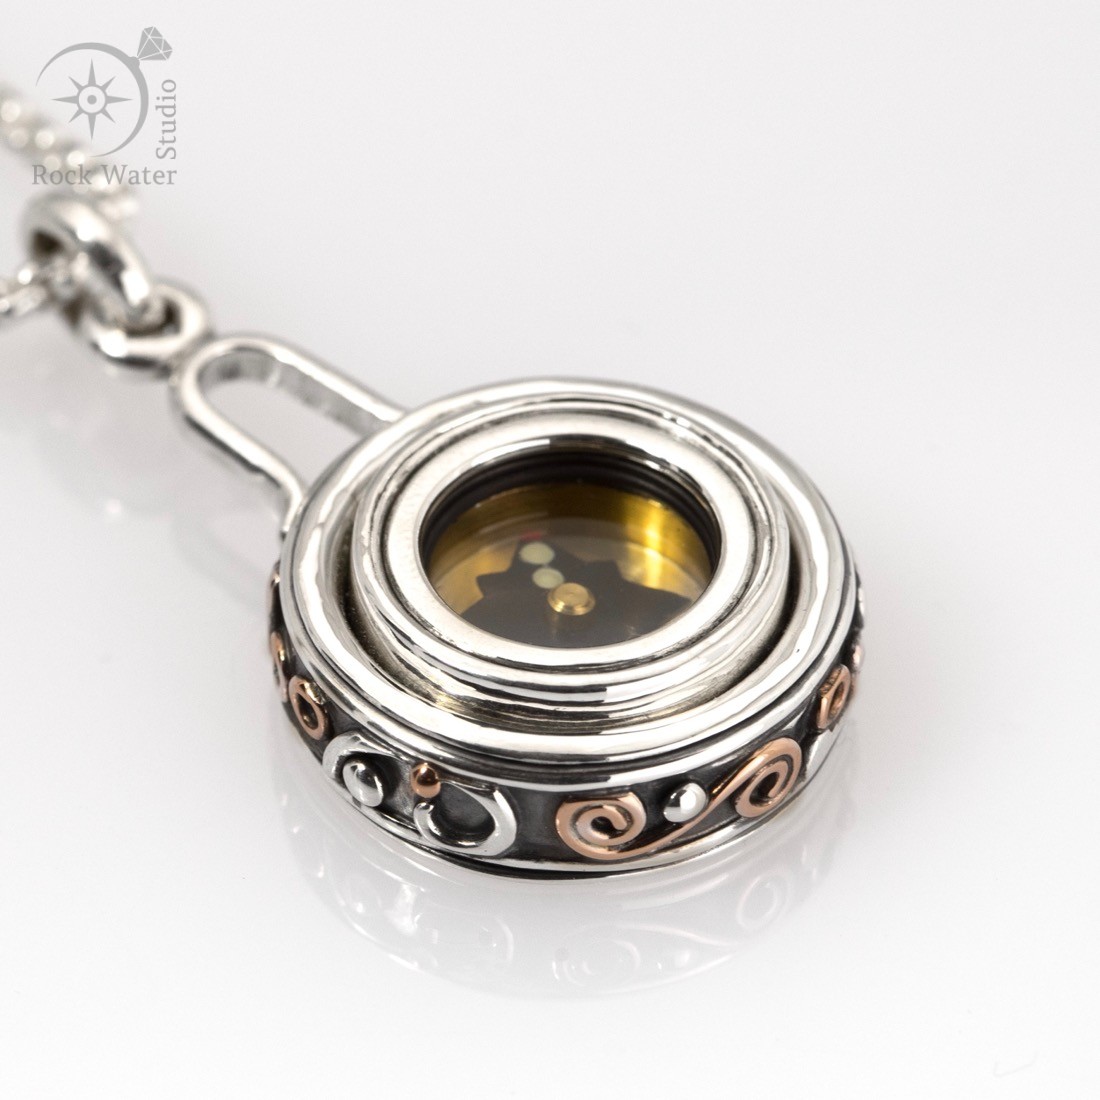 Intuition Compass Pendant (g512)